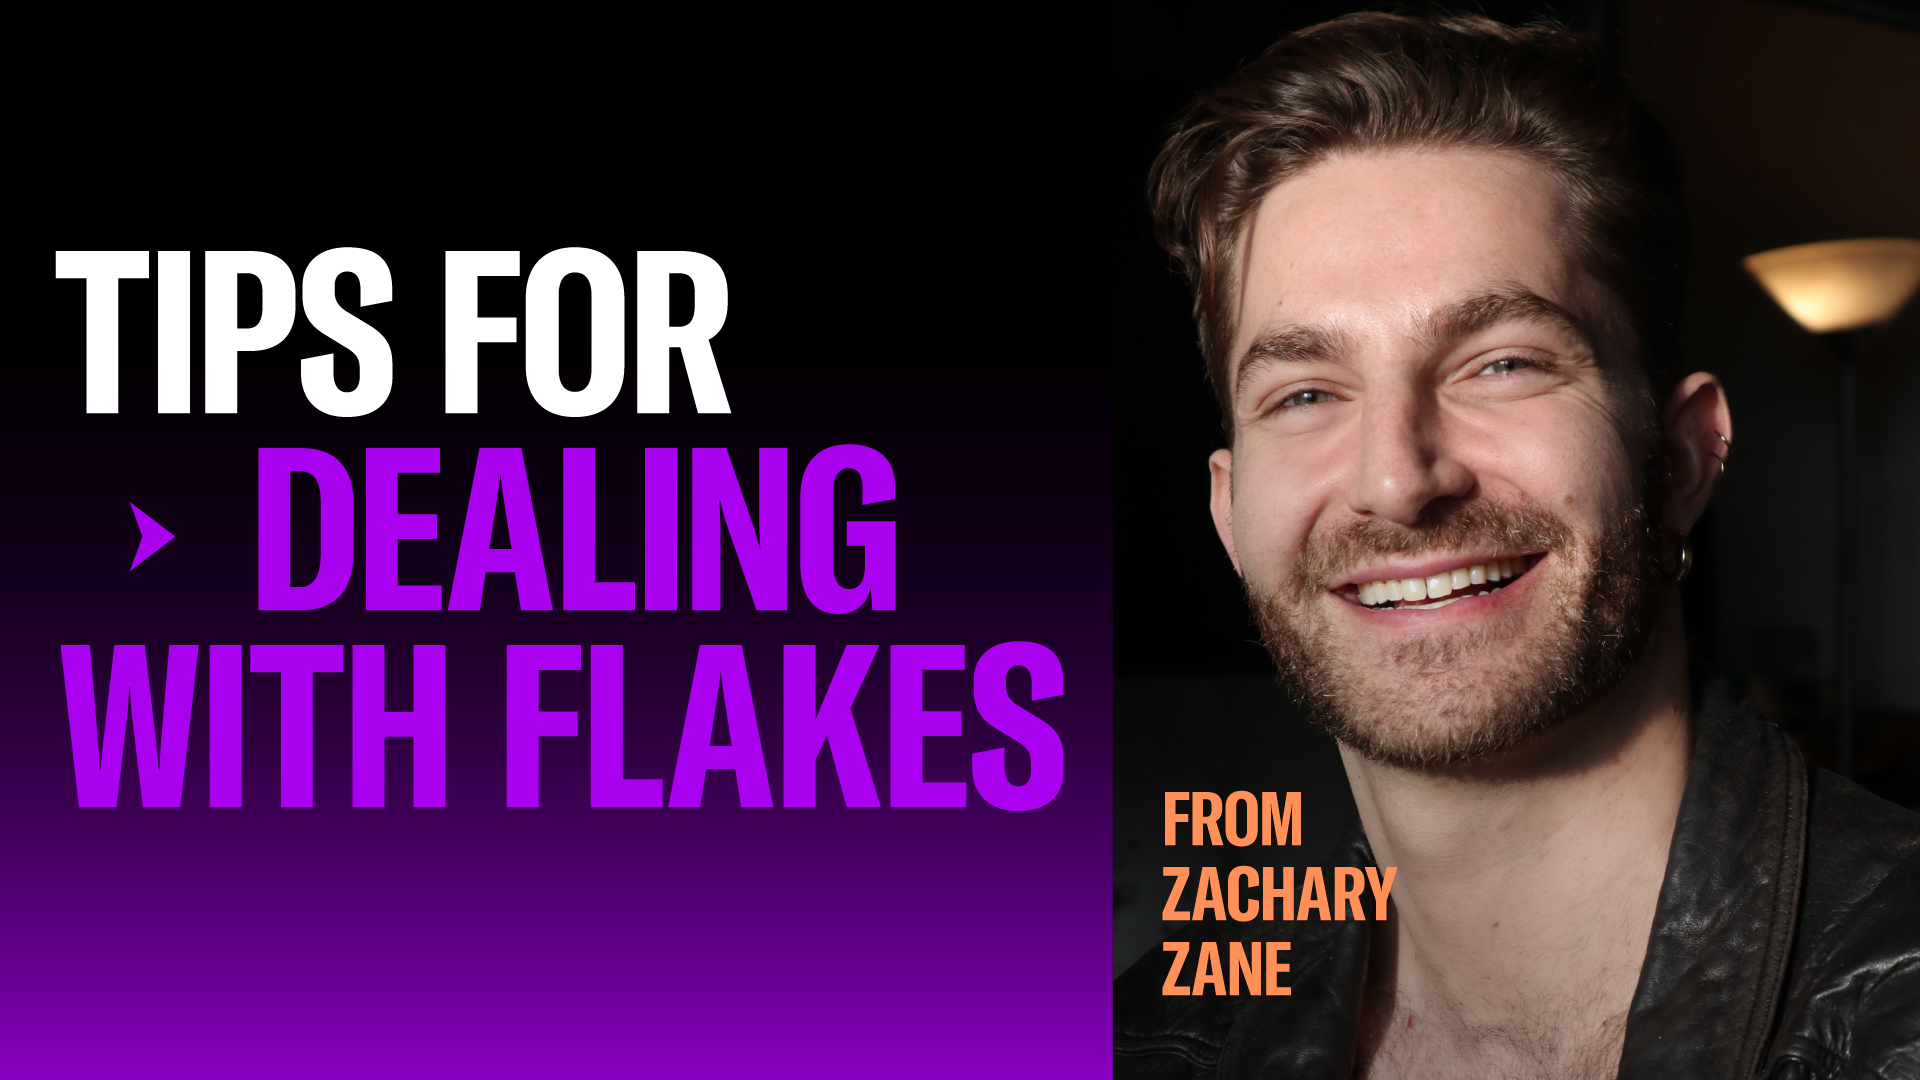 5 TIPS FOR DATING IN THE AGE OF FLAKES WHEN YOU’RE LOOKING FOR COMMITMENT  Zachary Zane is a sex and relationship columnist who recently authored Boyslut: A Memoir and Manifesto.